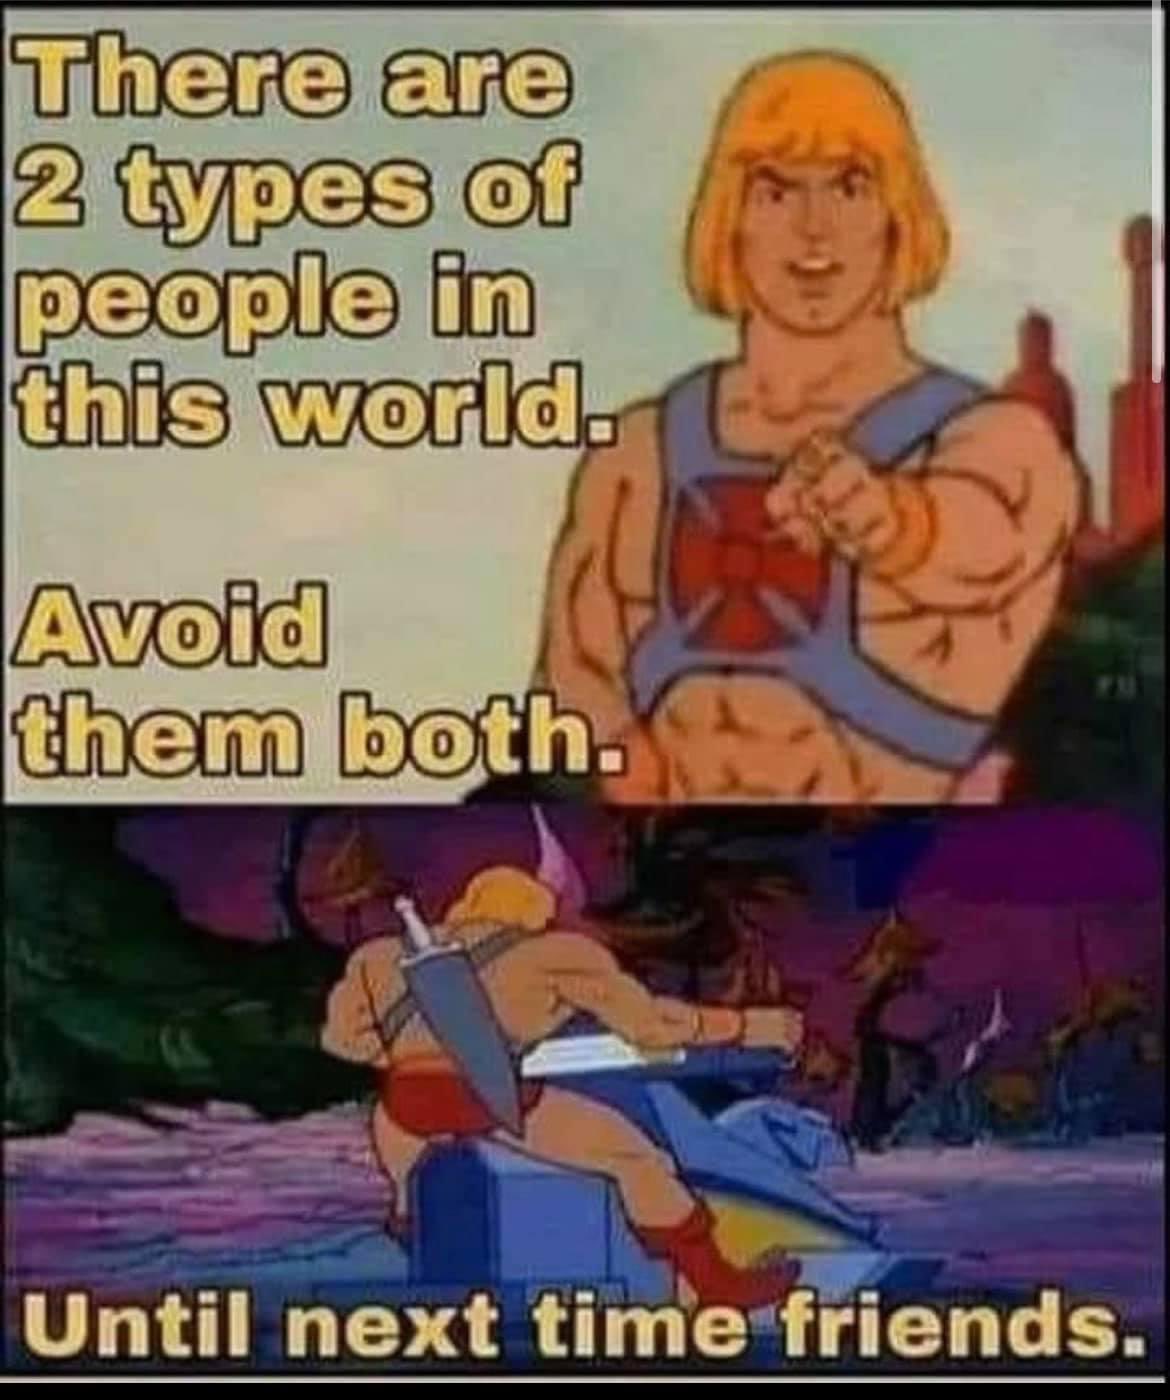 He-Man's elbow and knee arthritis is acting up again